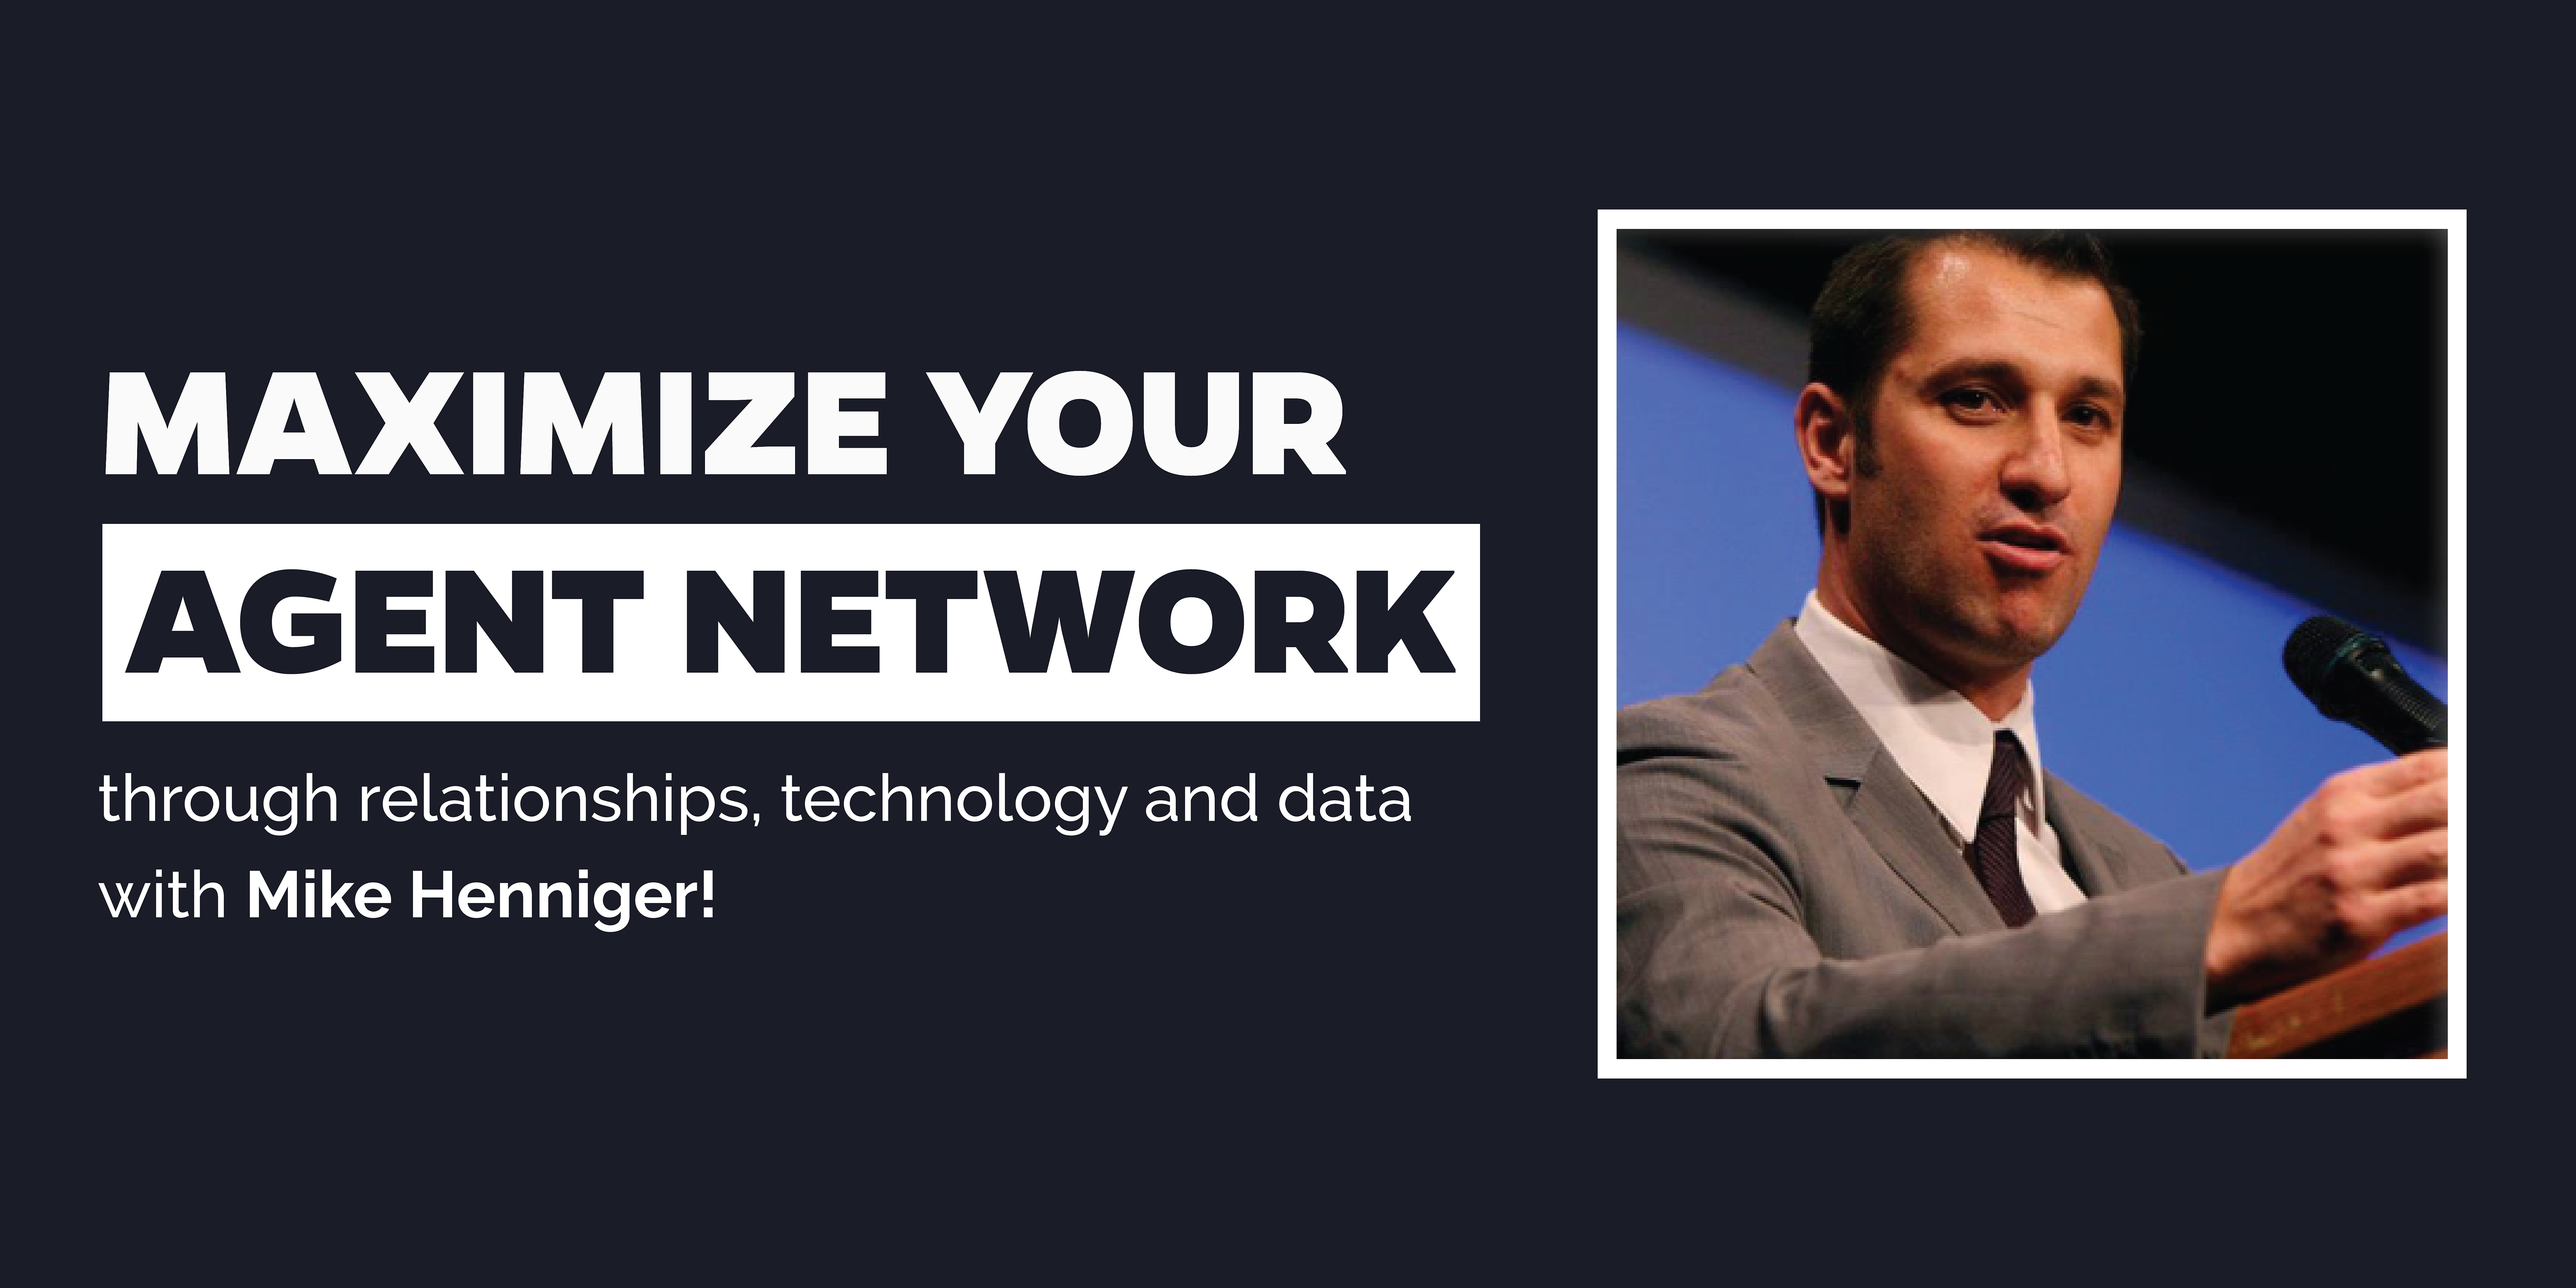 Maximize your agent network through relationships, technology and data Mike Henniger